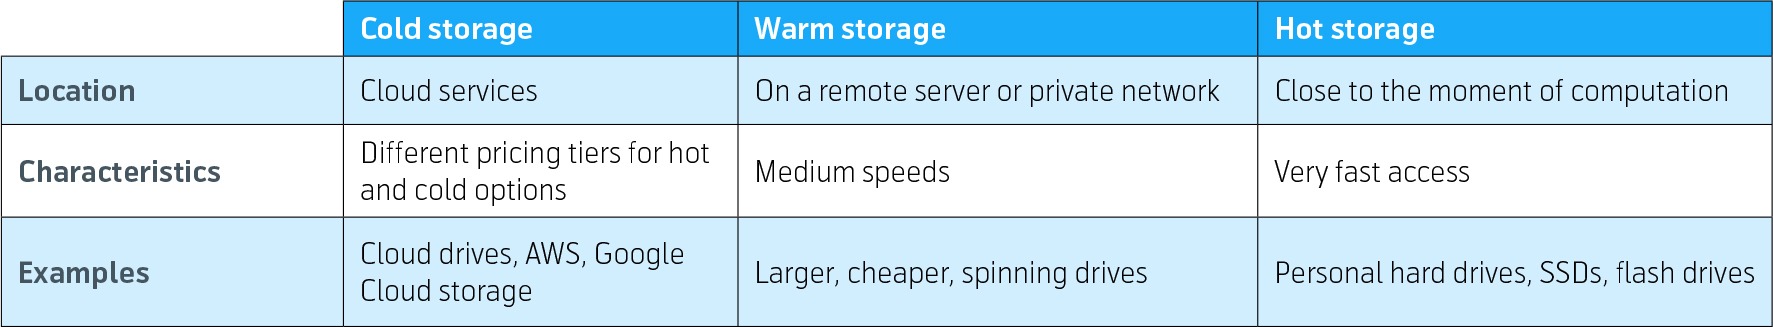 IoT-data-differences-hot-warm-cold